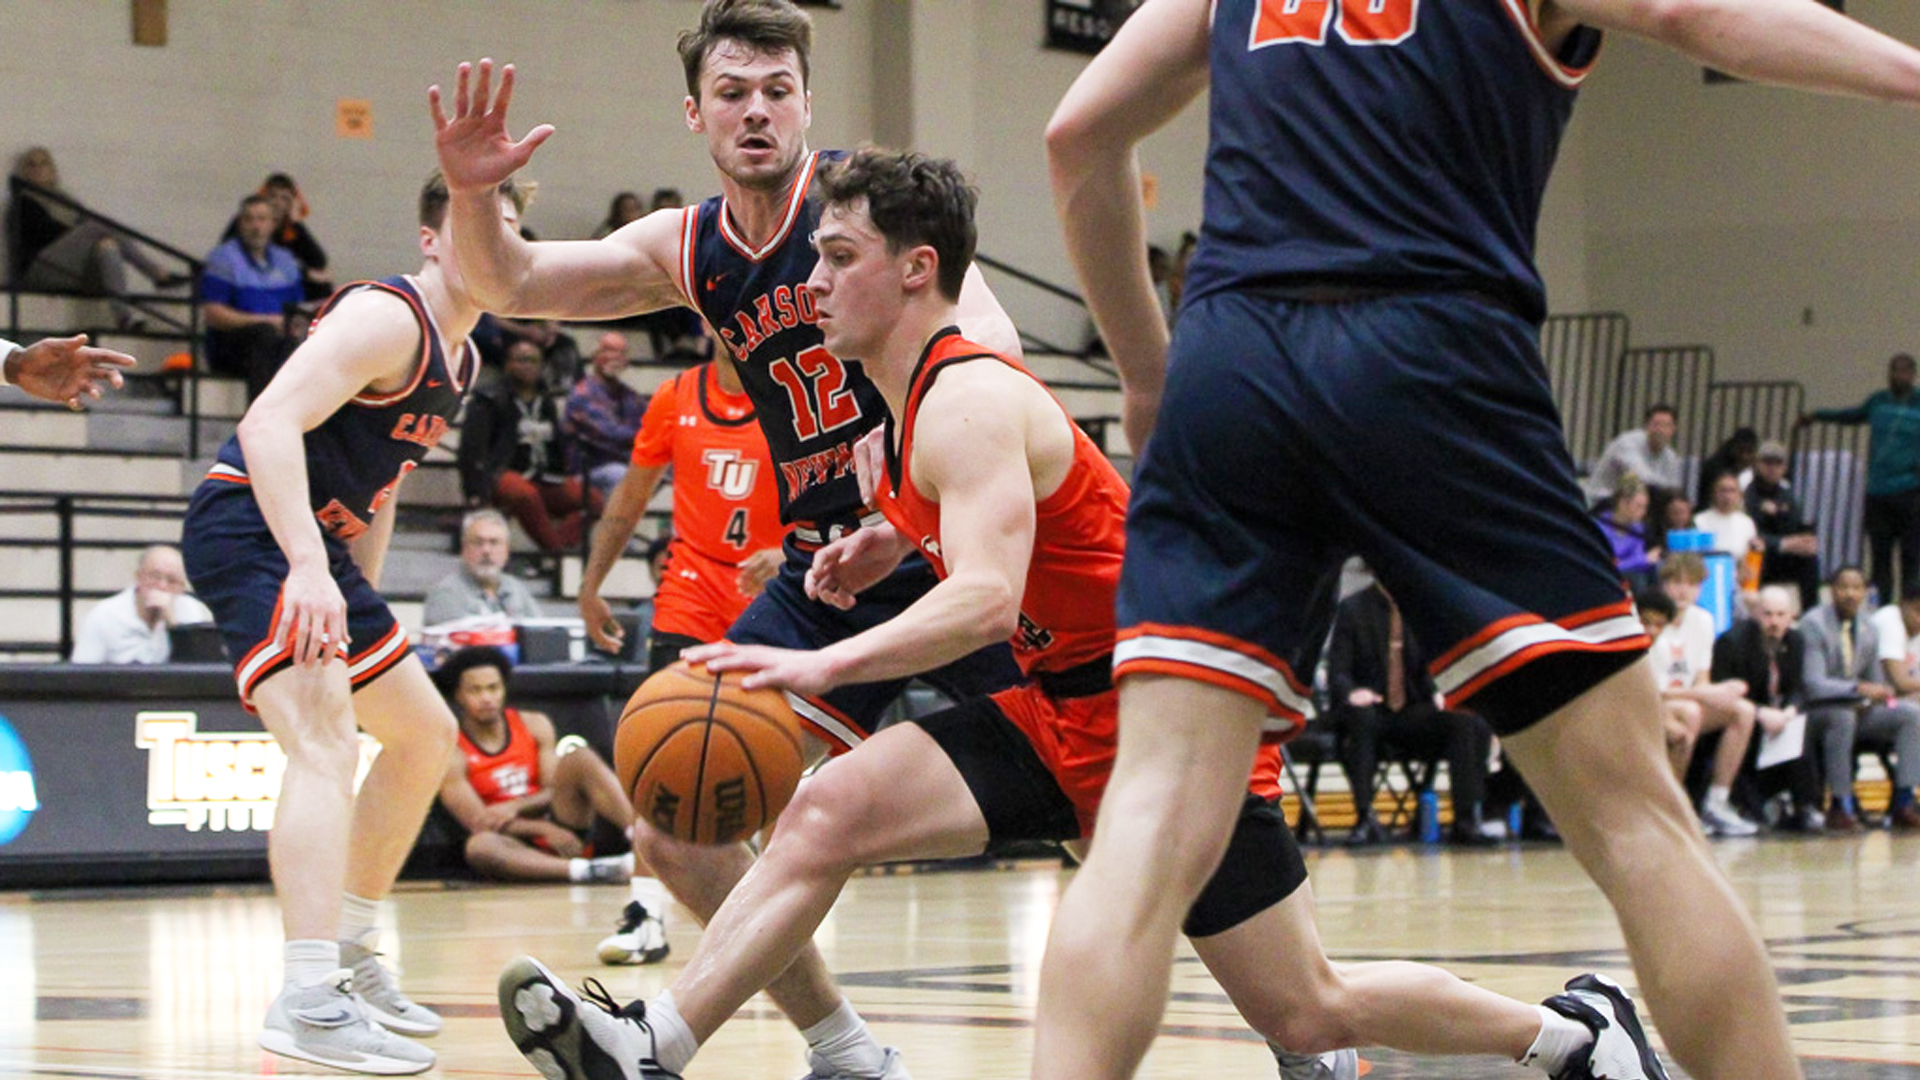 Connor Jordan scored 17 points including 14 in the second half in Tusculum's home win over Carson-Newman (photo by Kari Ham, student photographer)